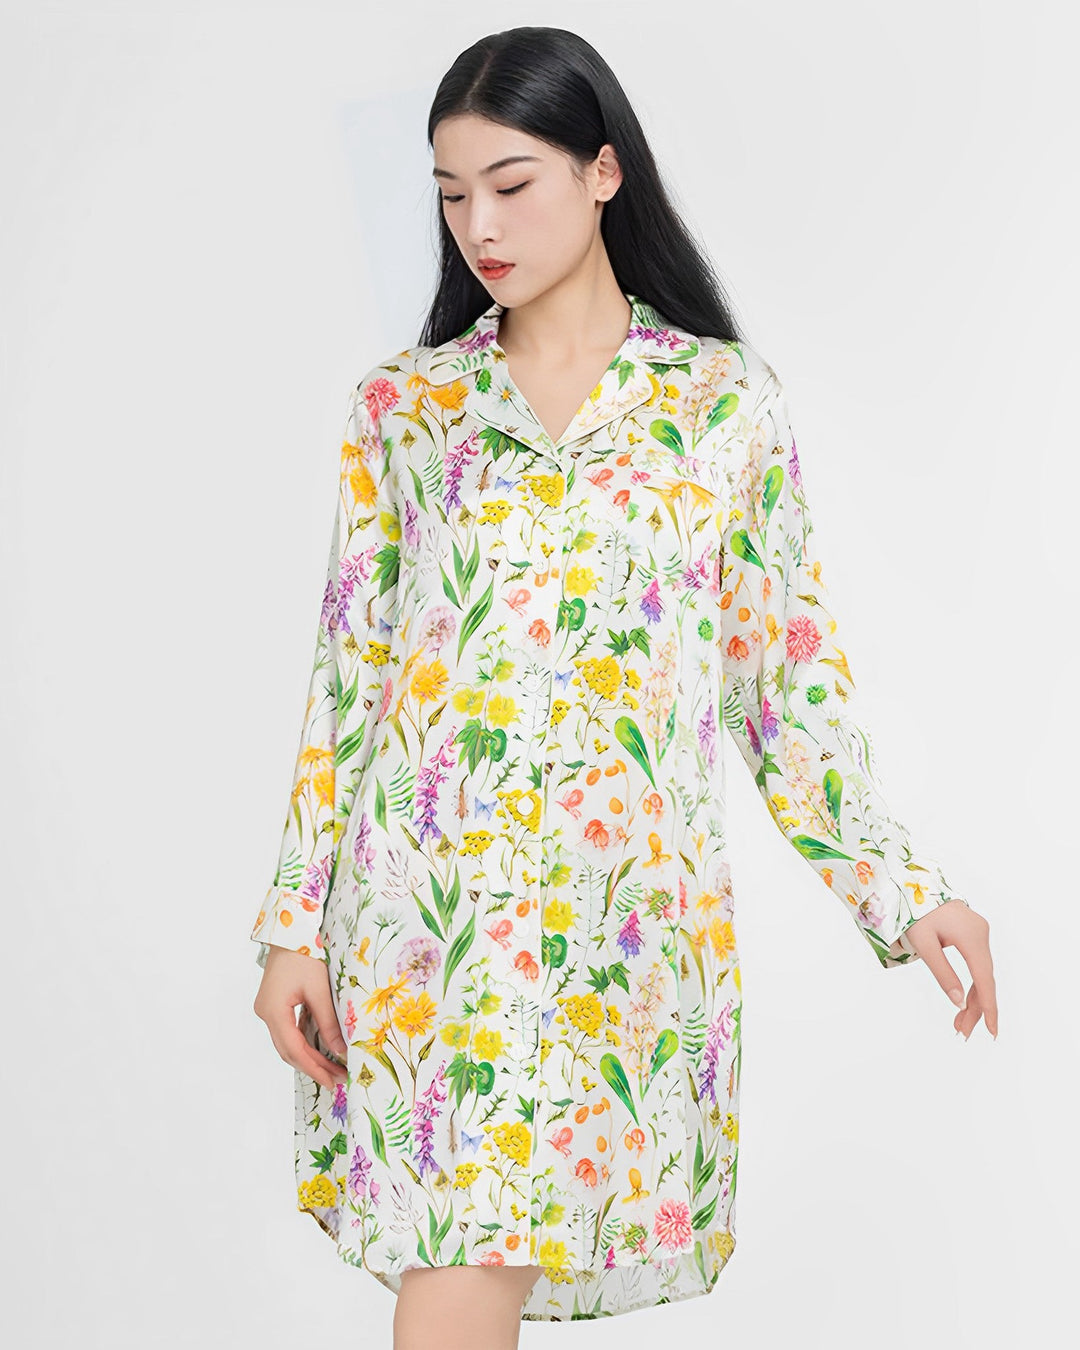 19 Momme Floral Printed Nightgown Shirt Style - SusanSilk